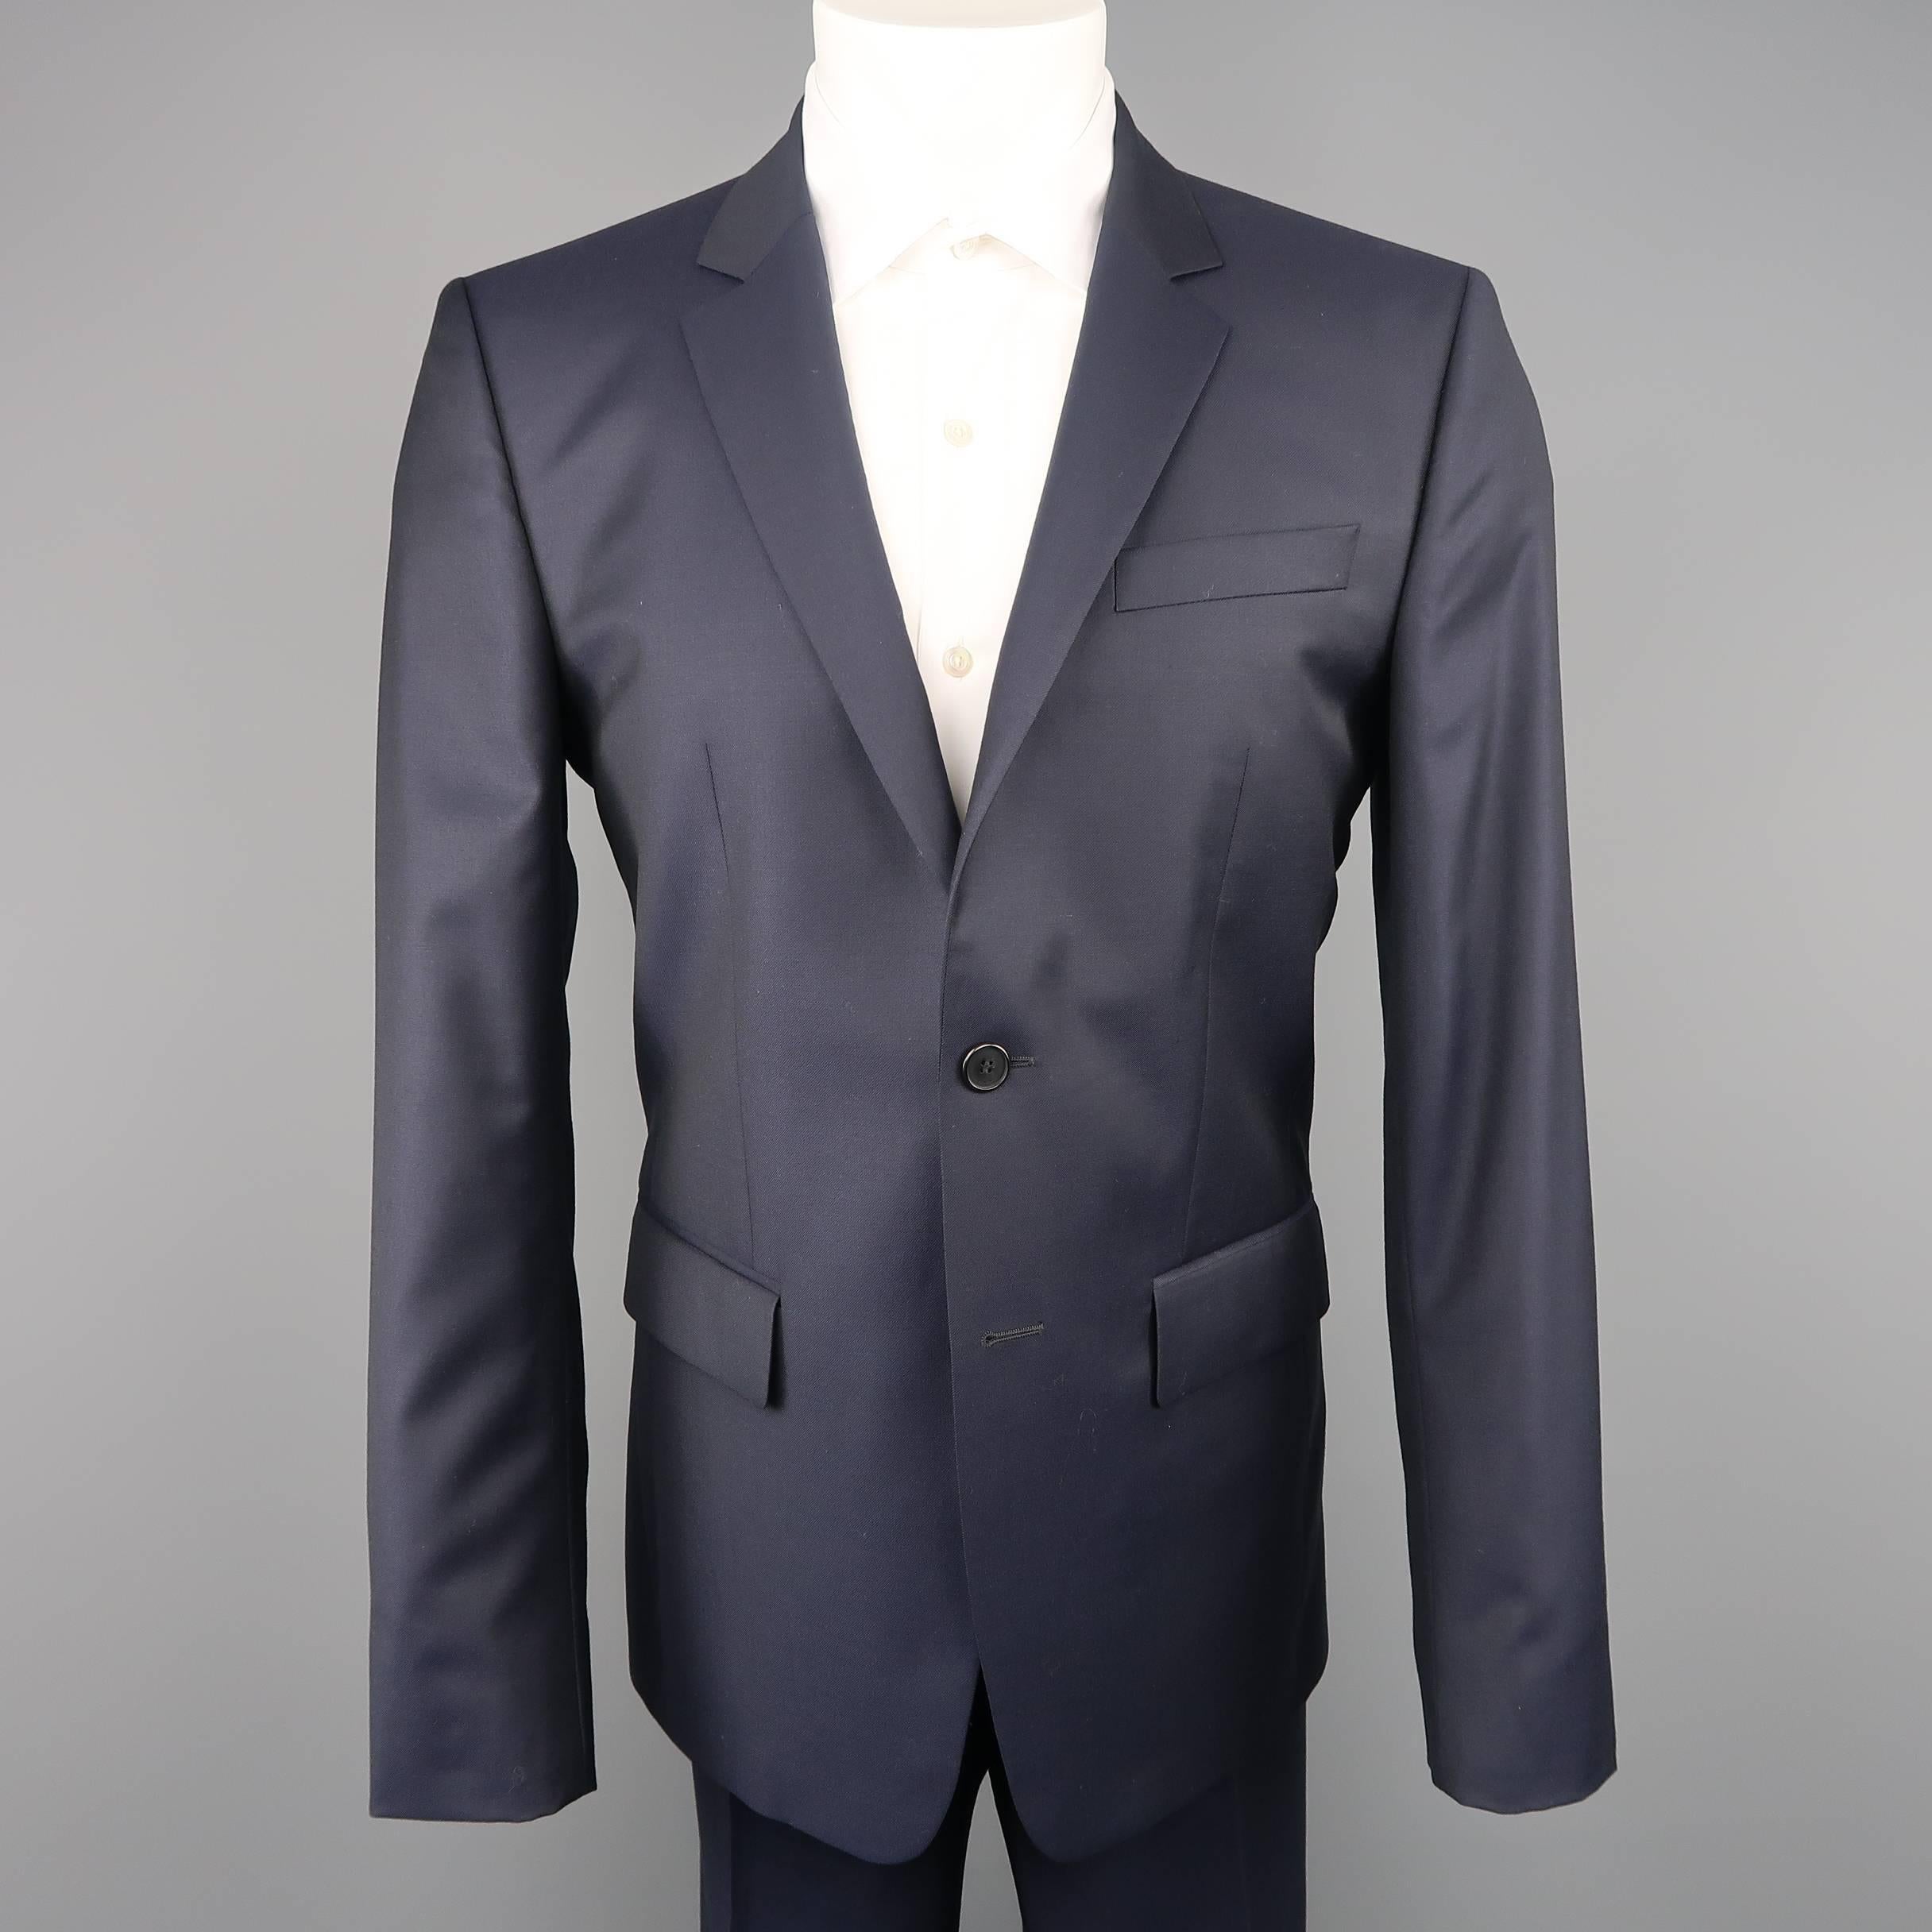 Two piece GIVENCHY by RICCARDO TISCI suit comes in navy blue wool twill and includes a two button, notch lapel sport coat with signature cross stitch back and matching flat front trousers. Made in Bulgarie.
 
Excellent Pre-Owned Condition.
Marked: